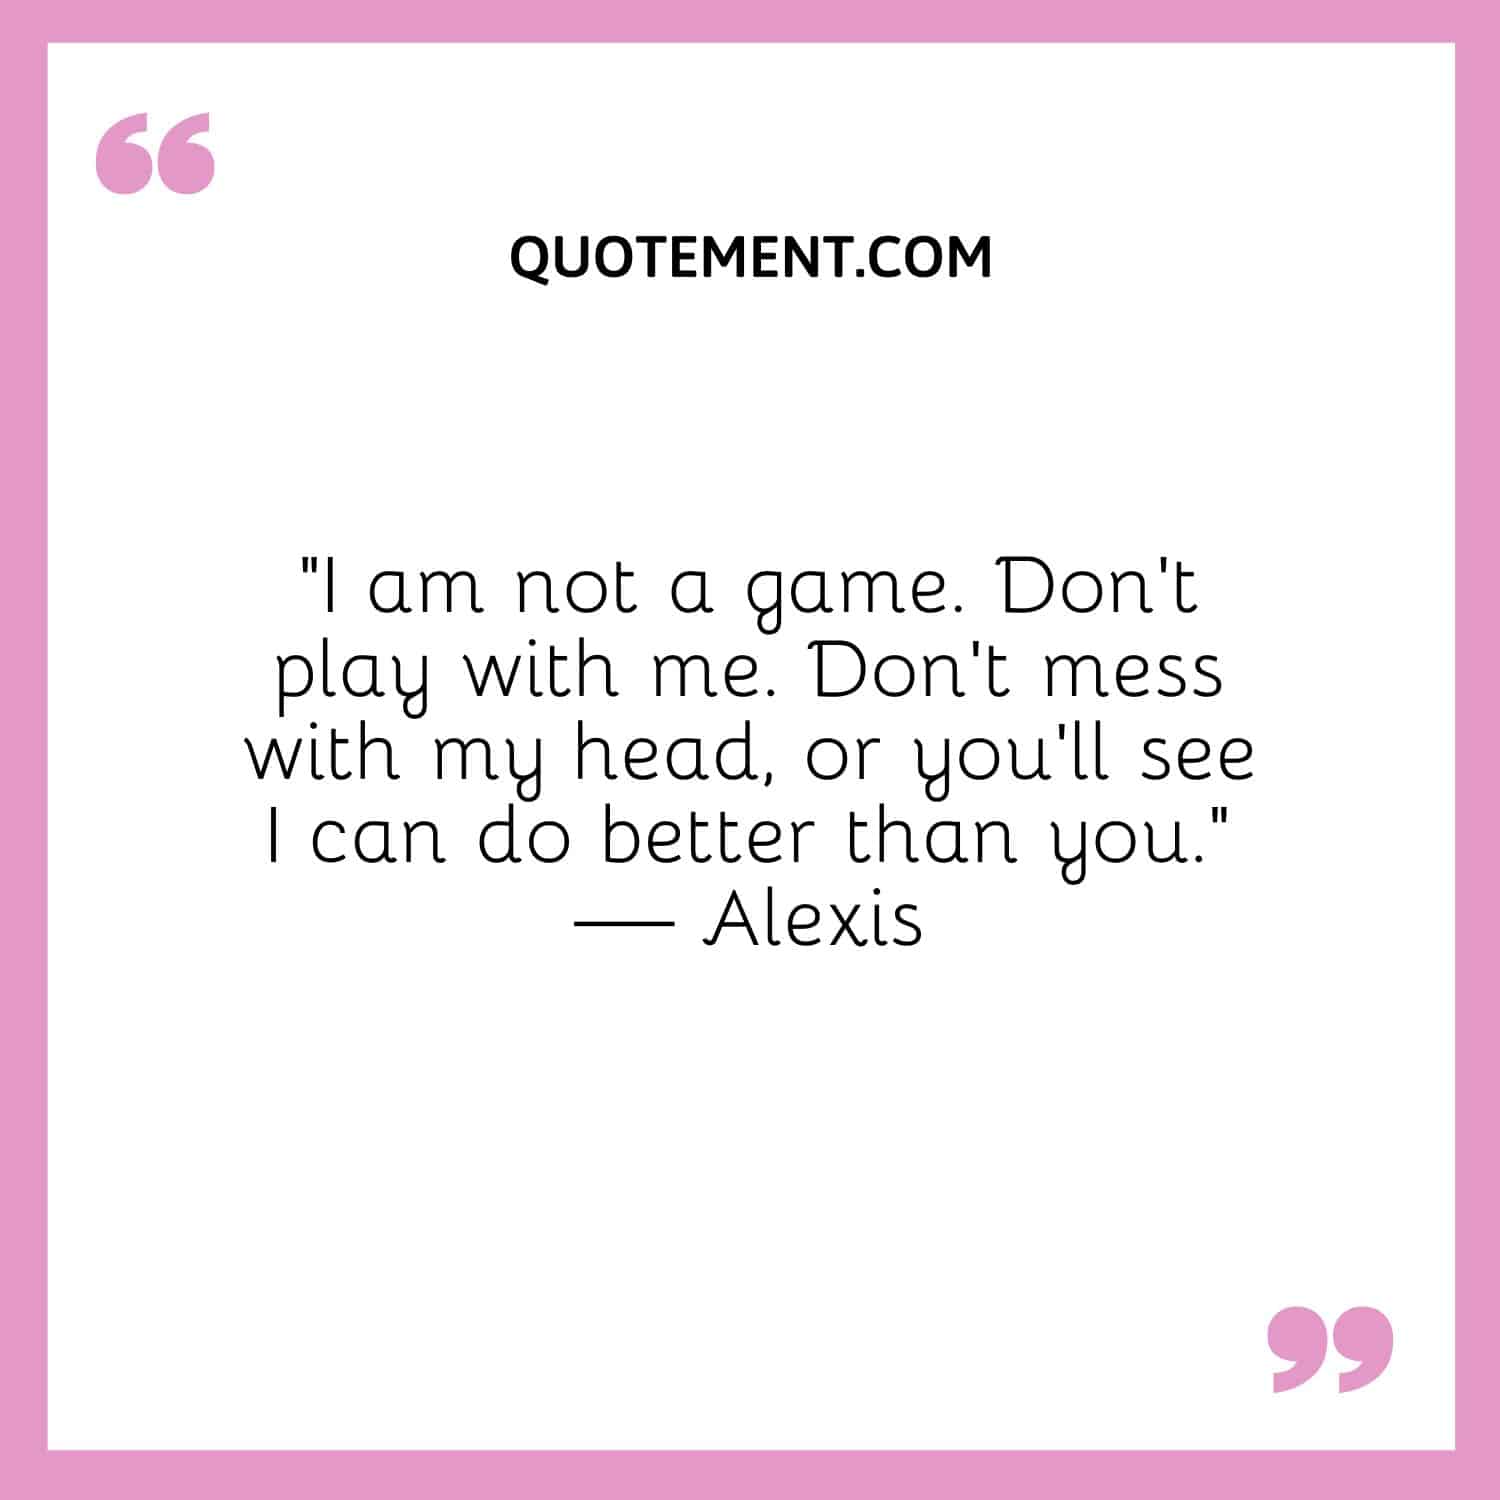 90 Brilliant Don't Play Games With Me Quotes To Remember